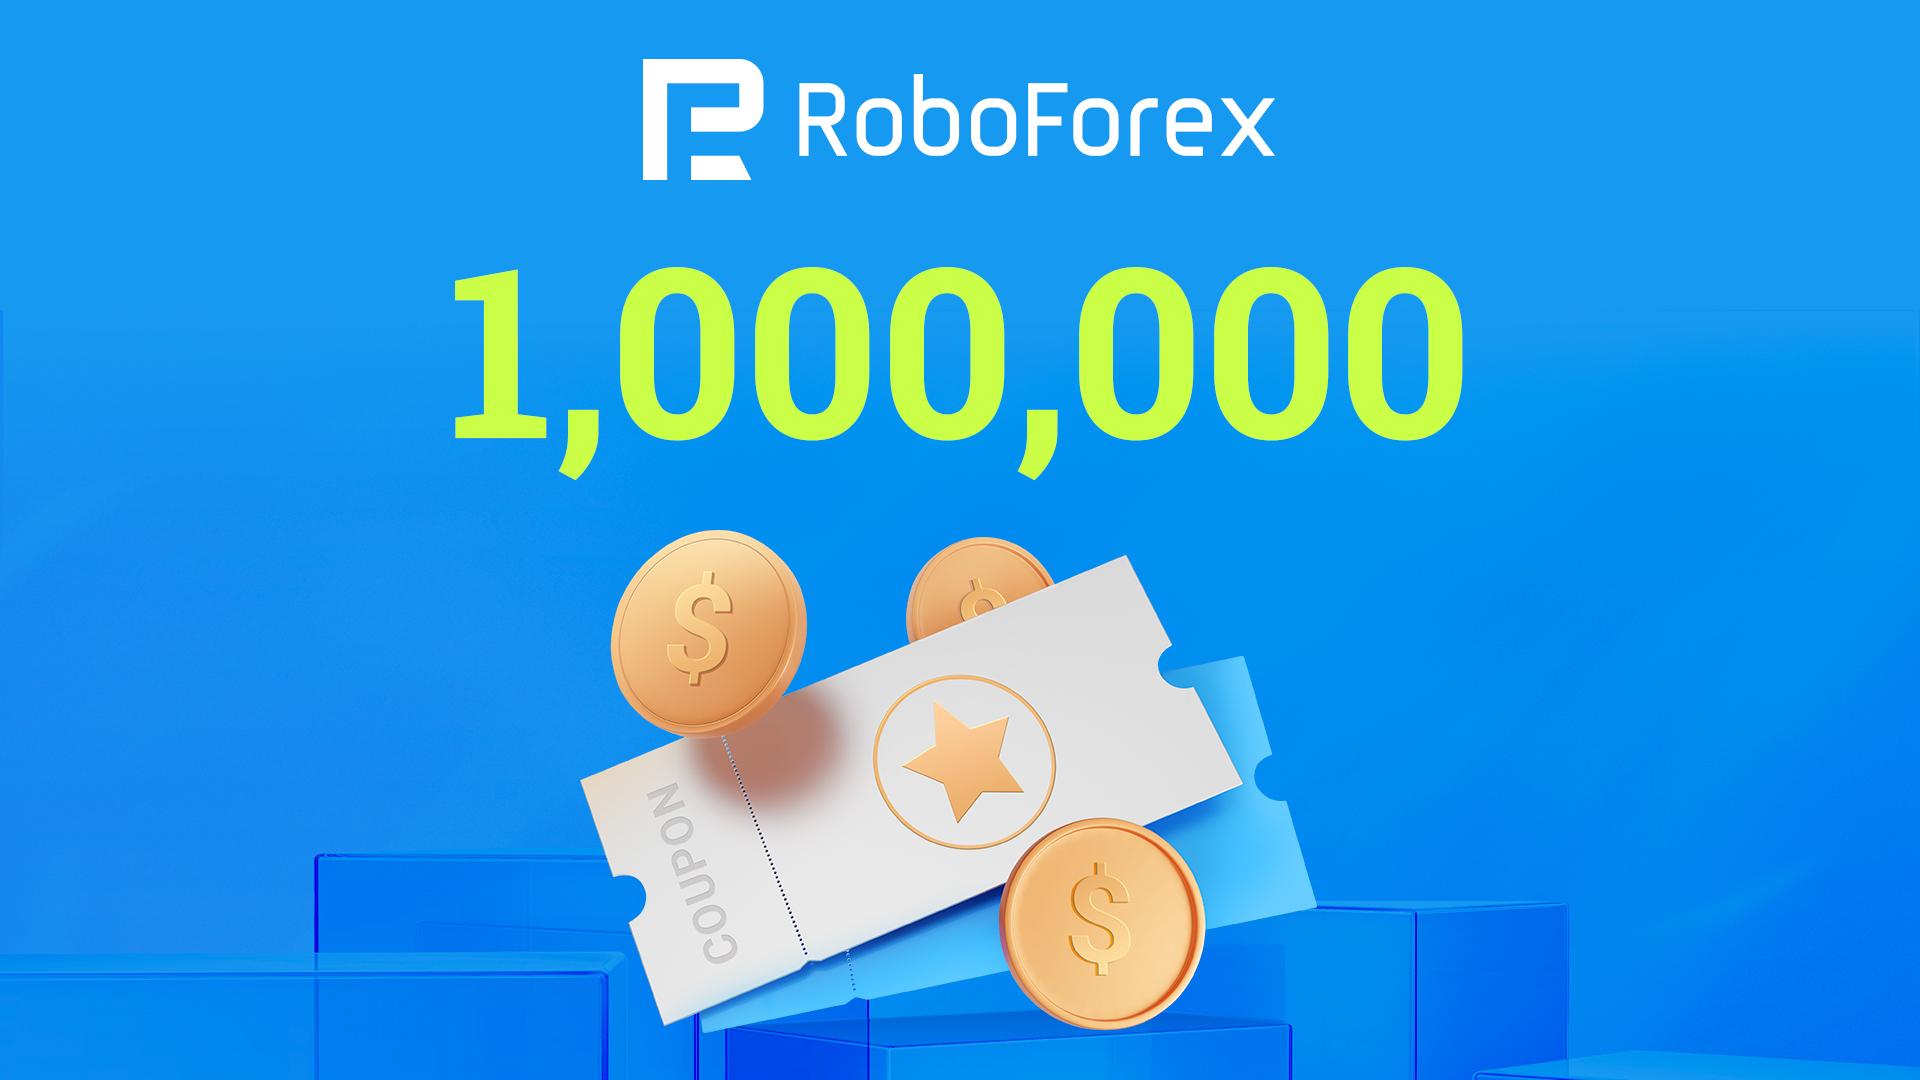 1,000,000 USD Promotion for RoboForex Partners